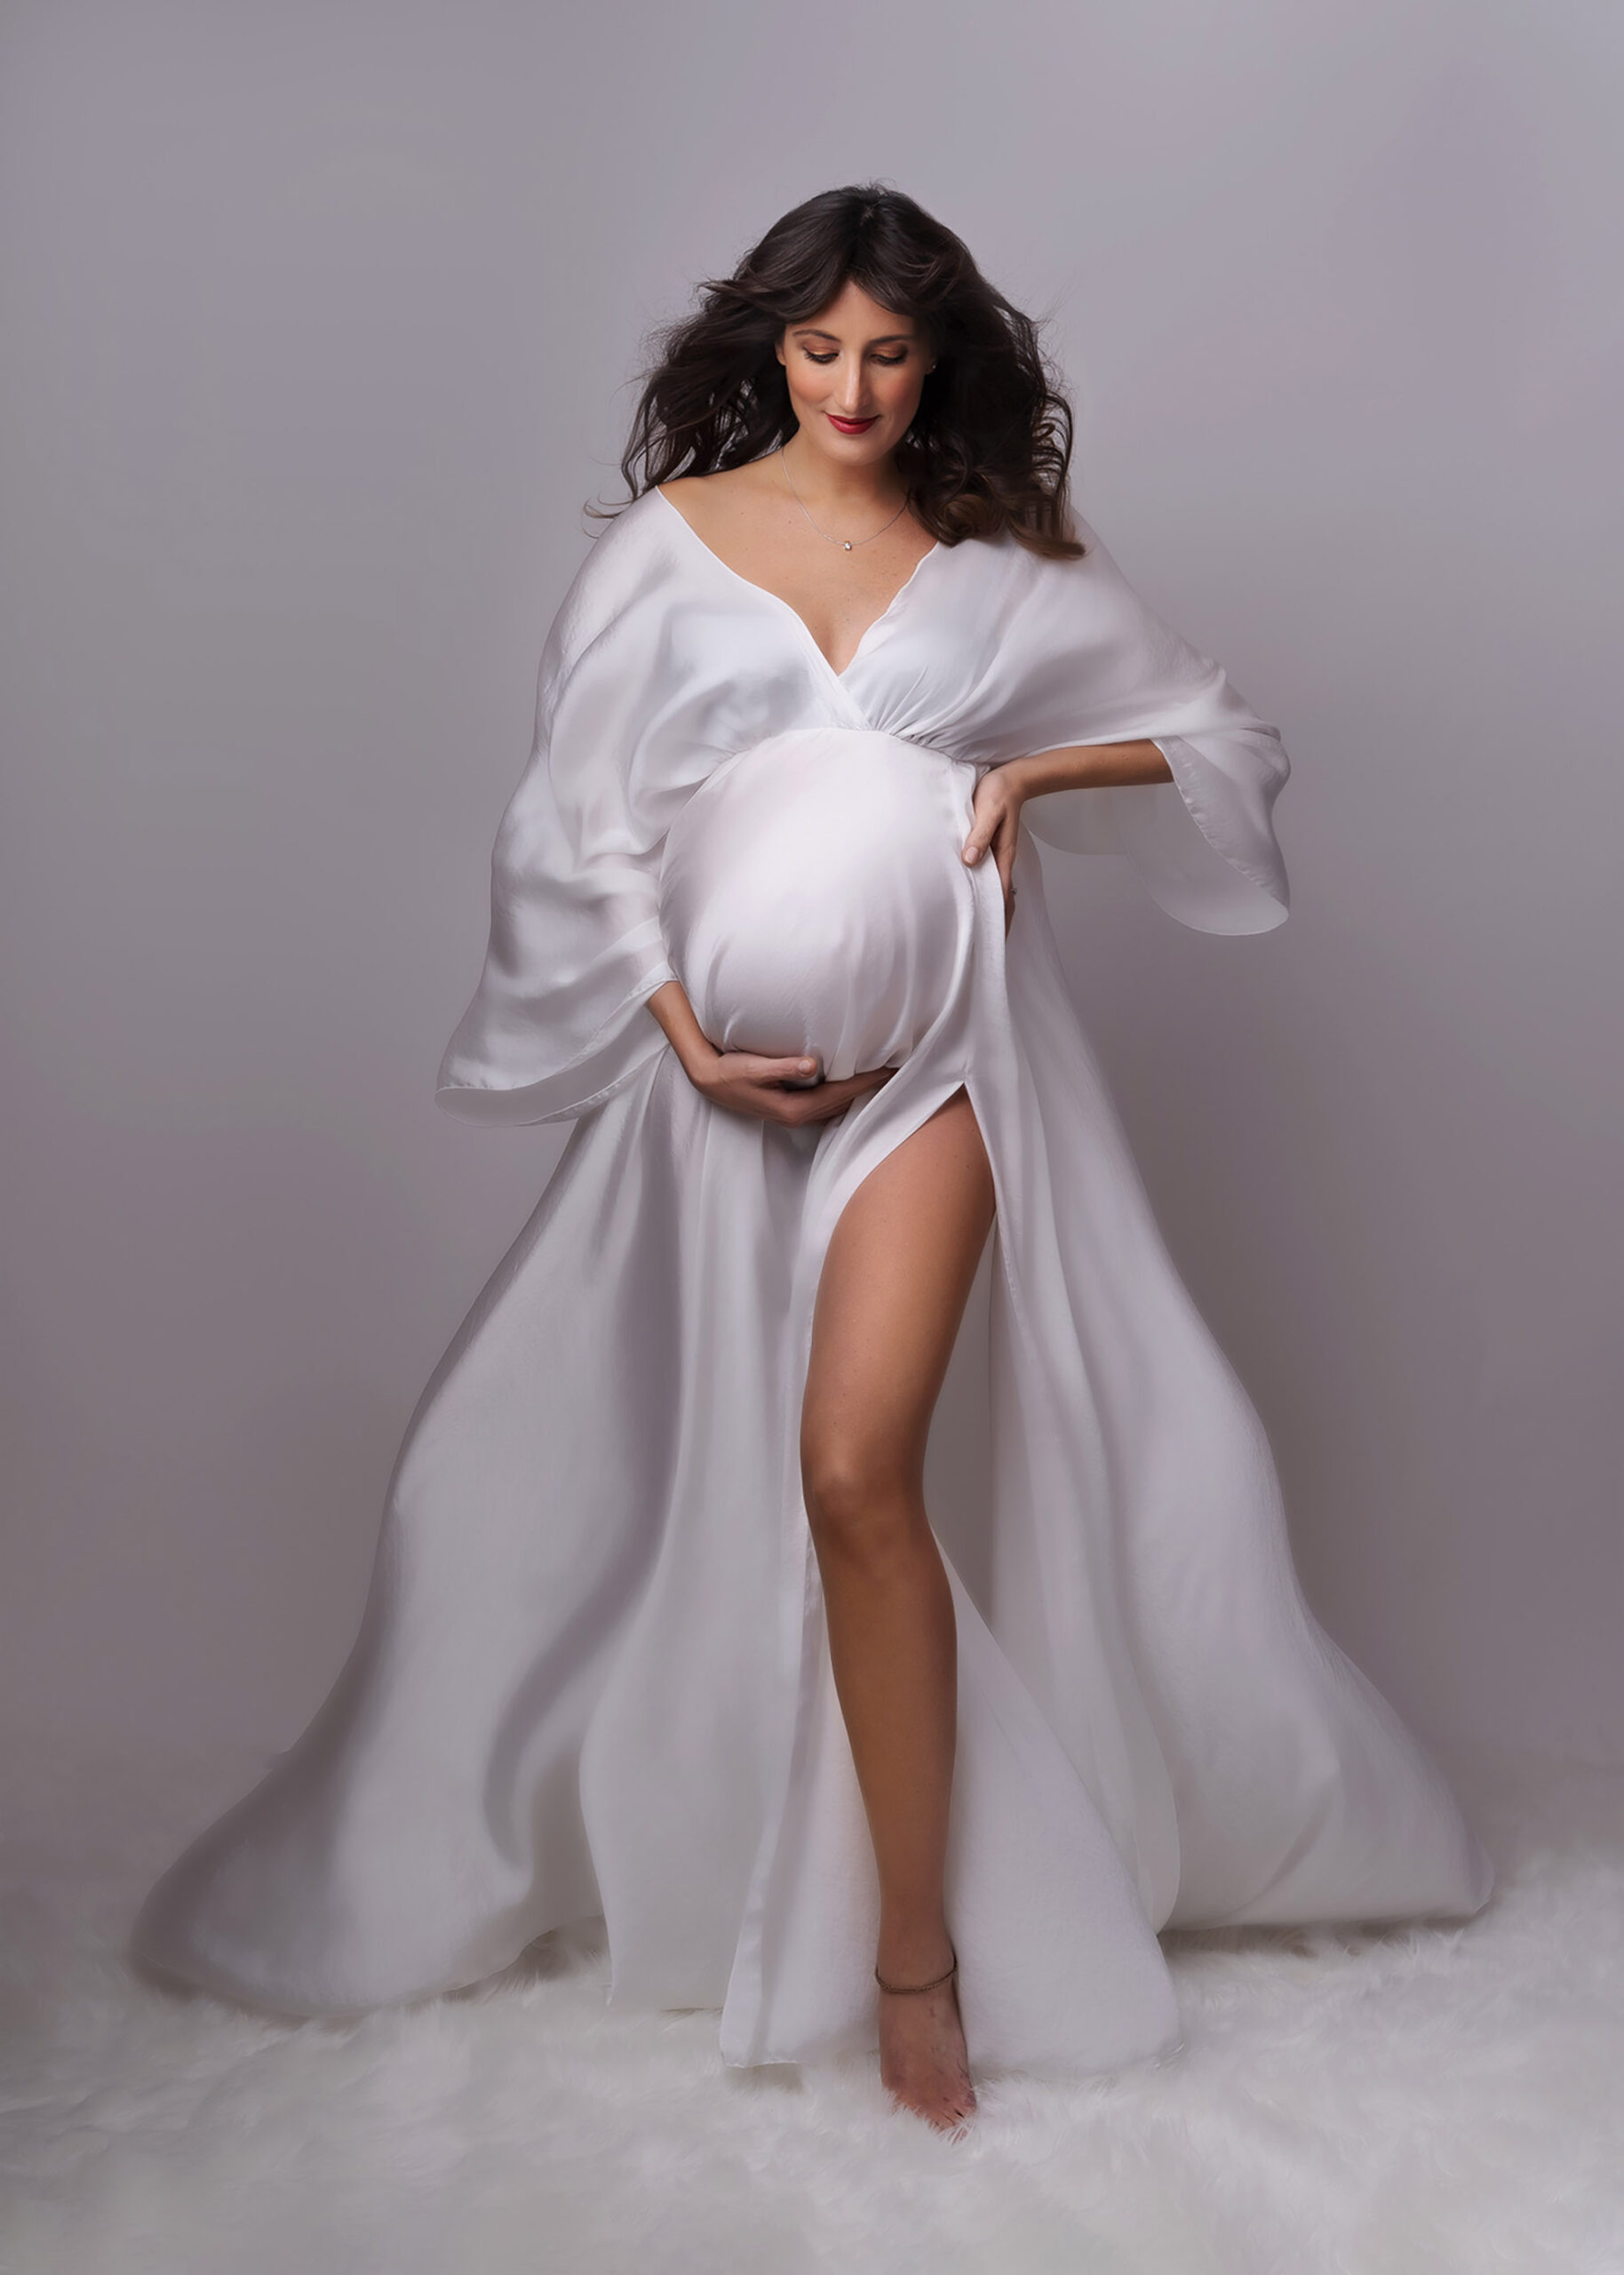 pregnant woman with long dark hair in a white flowing silk dress by maternity photographer in Surrey